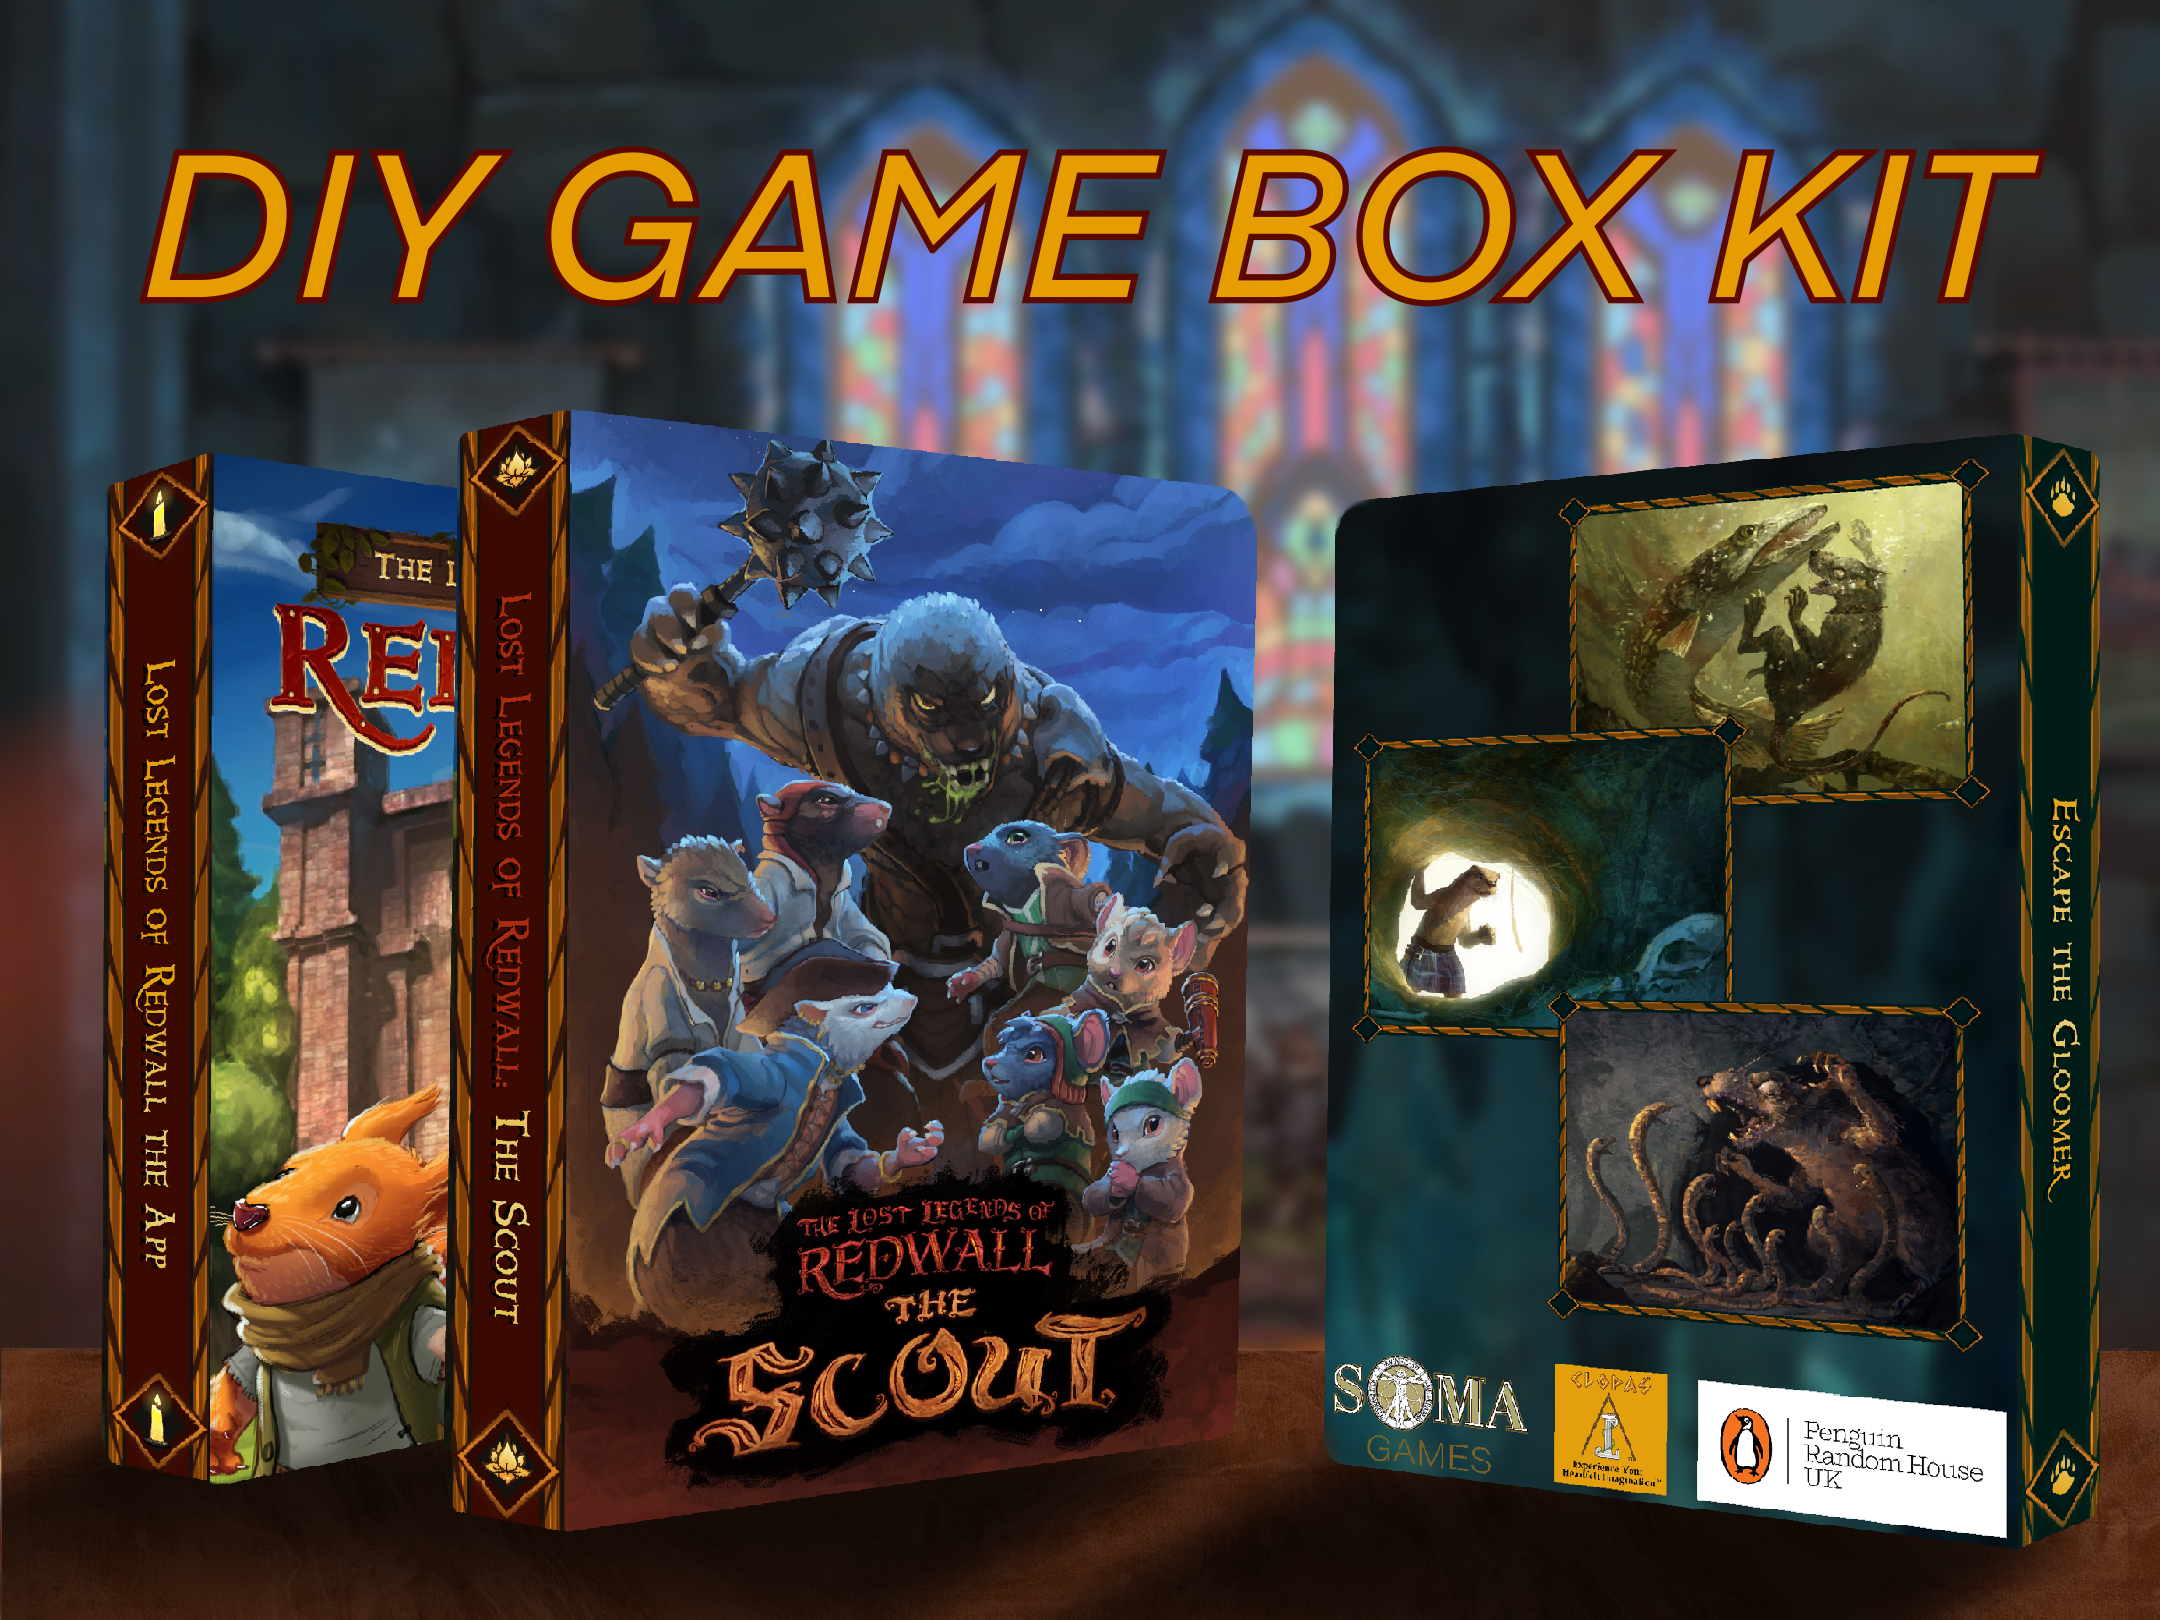 The lost legends of redwall. The Lost Legends of Redwall: the Scout Anthology. Be Kon Box.